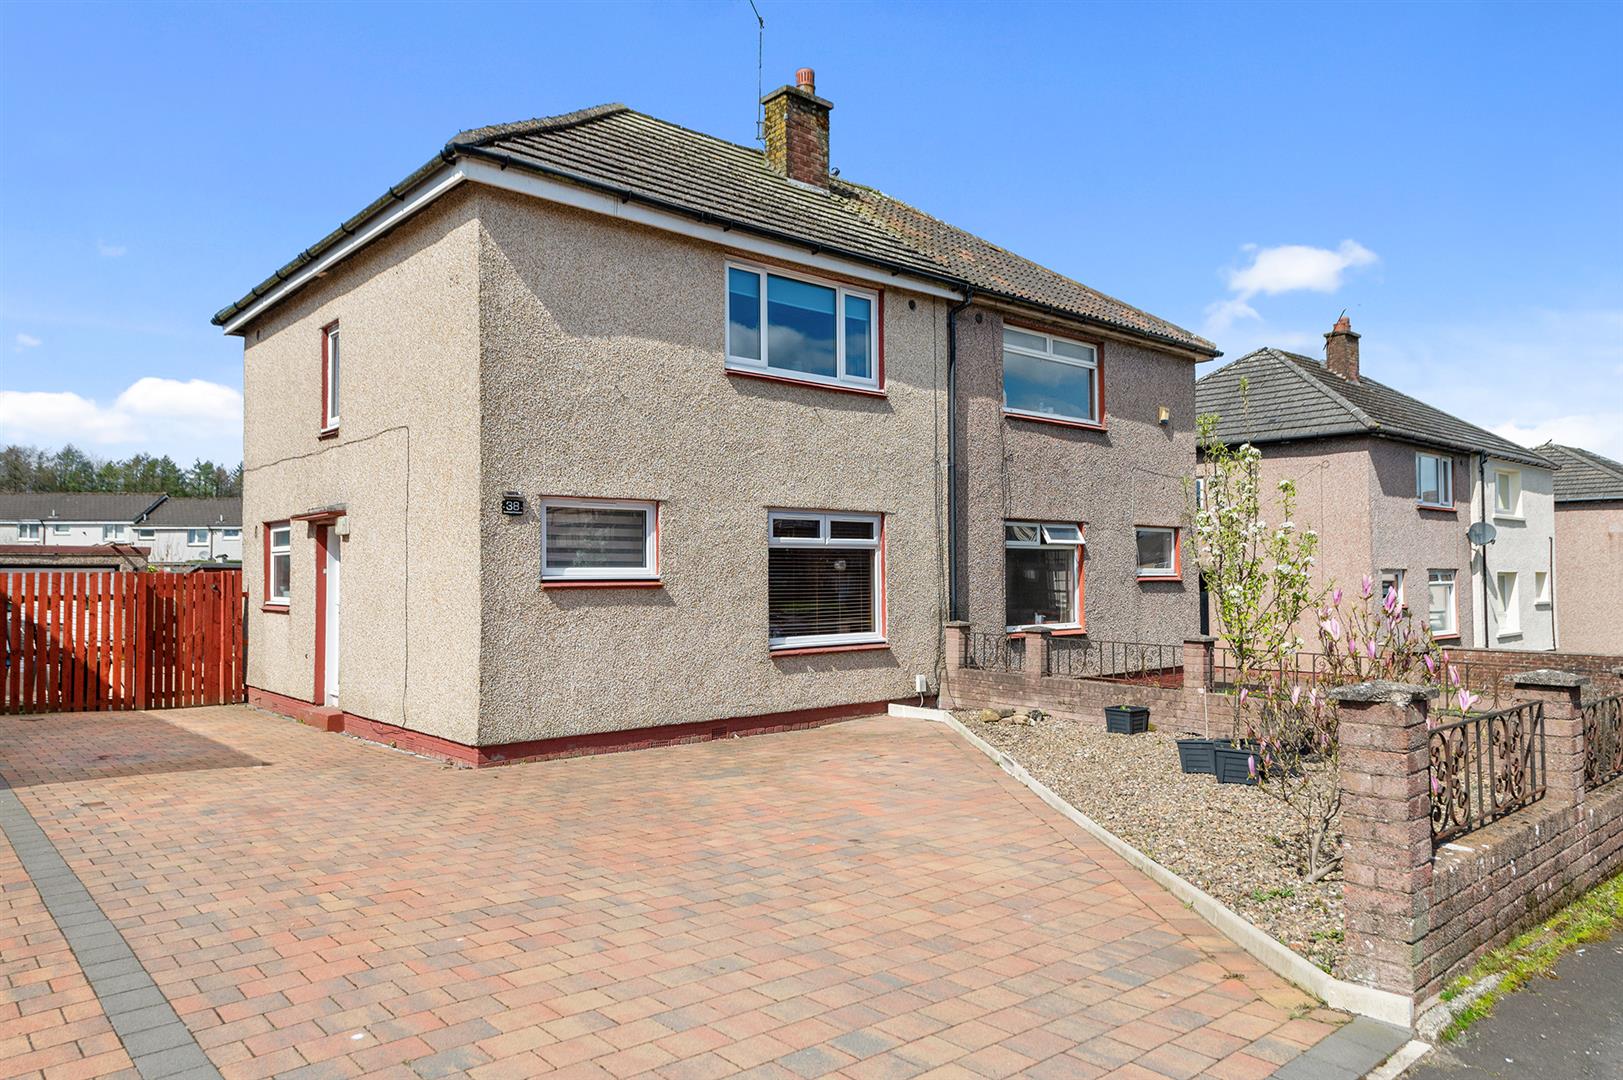 3 bed house for sale in Bankhead Crescent, Falkirk 0